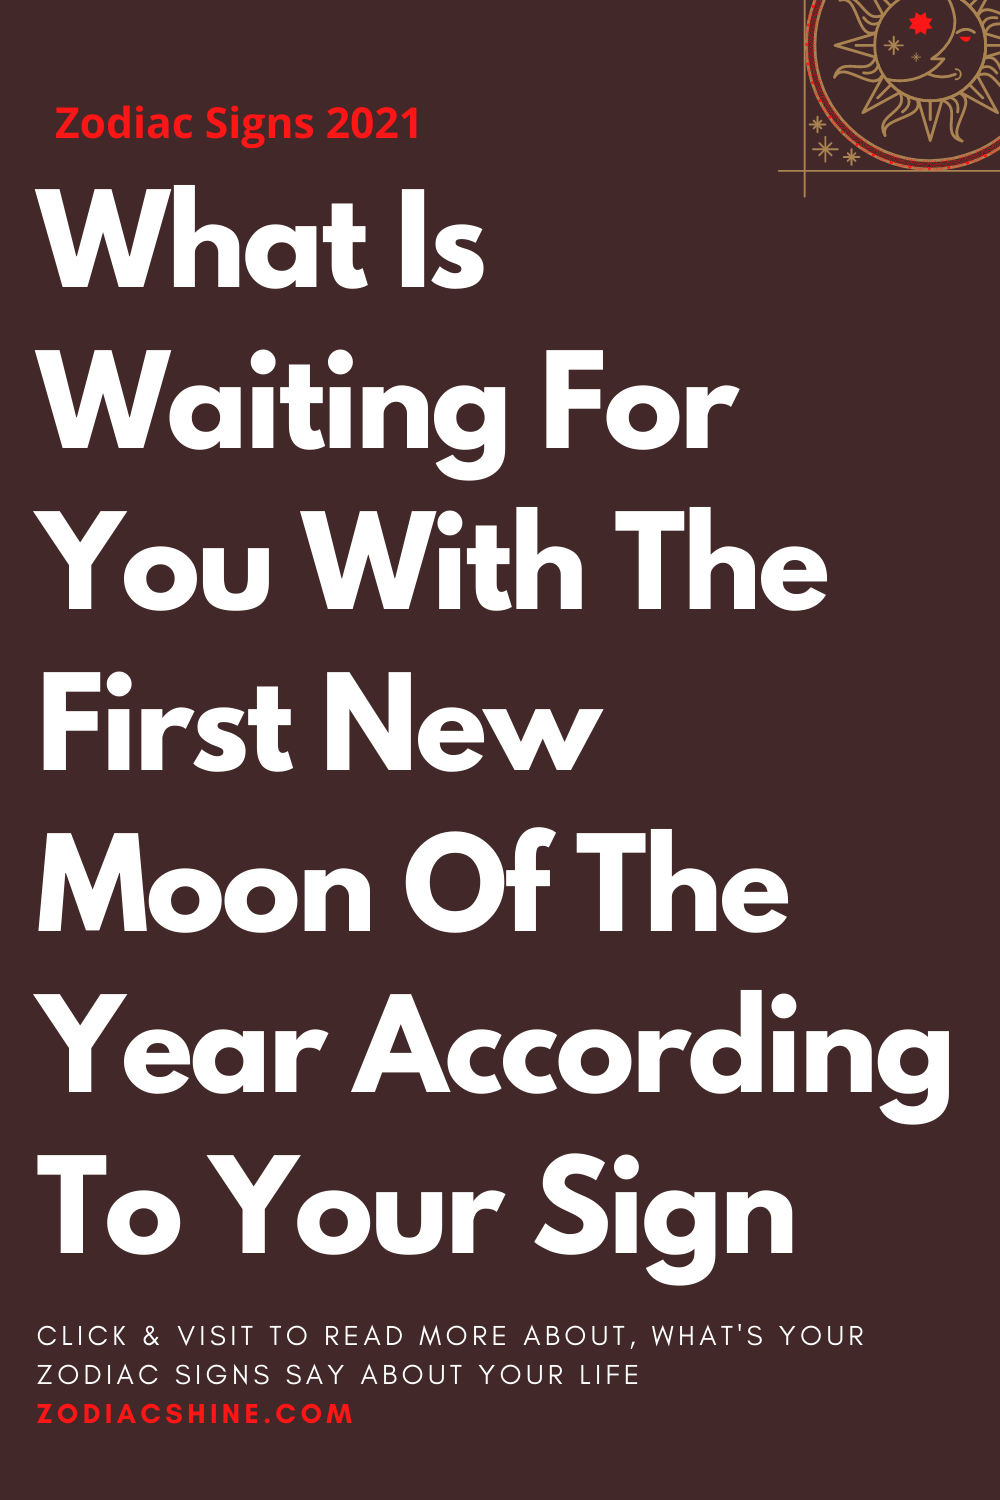 What Is Waiting For You With The First New Moon Of The Year According To Your Sign